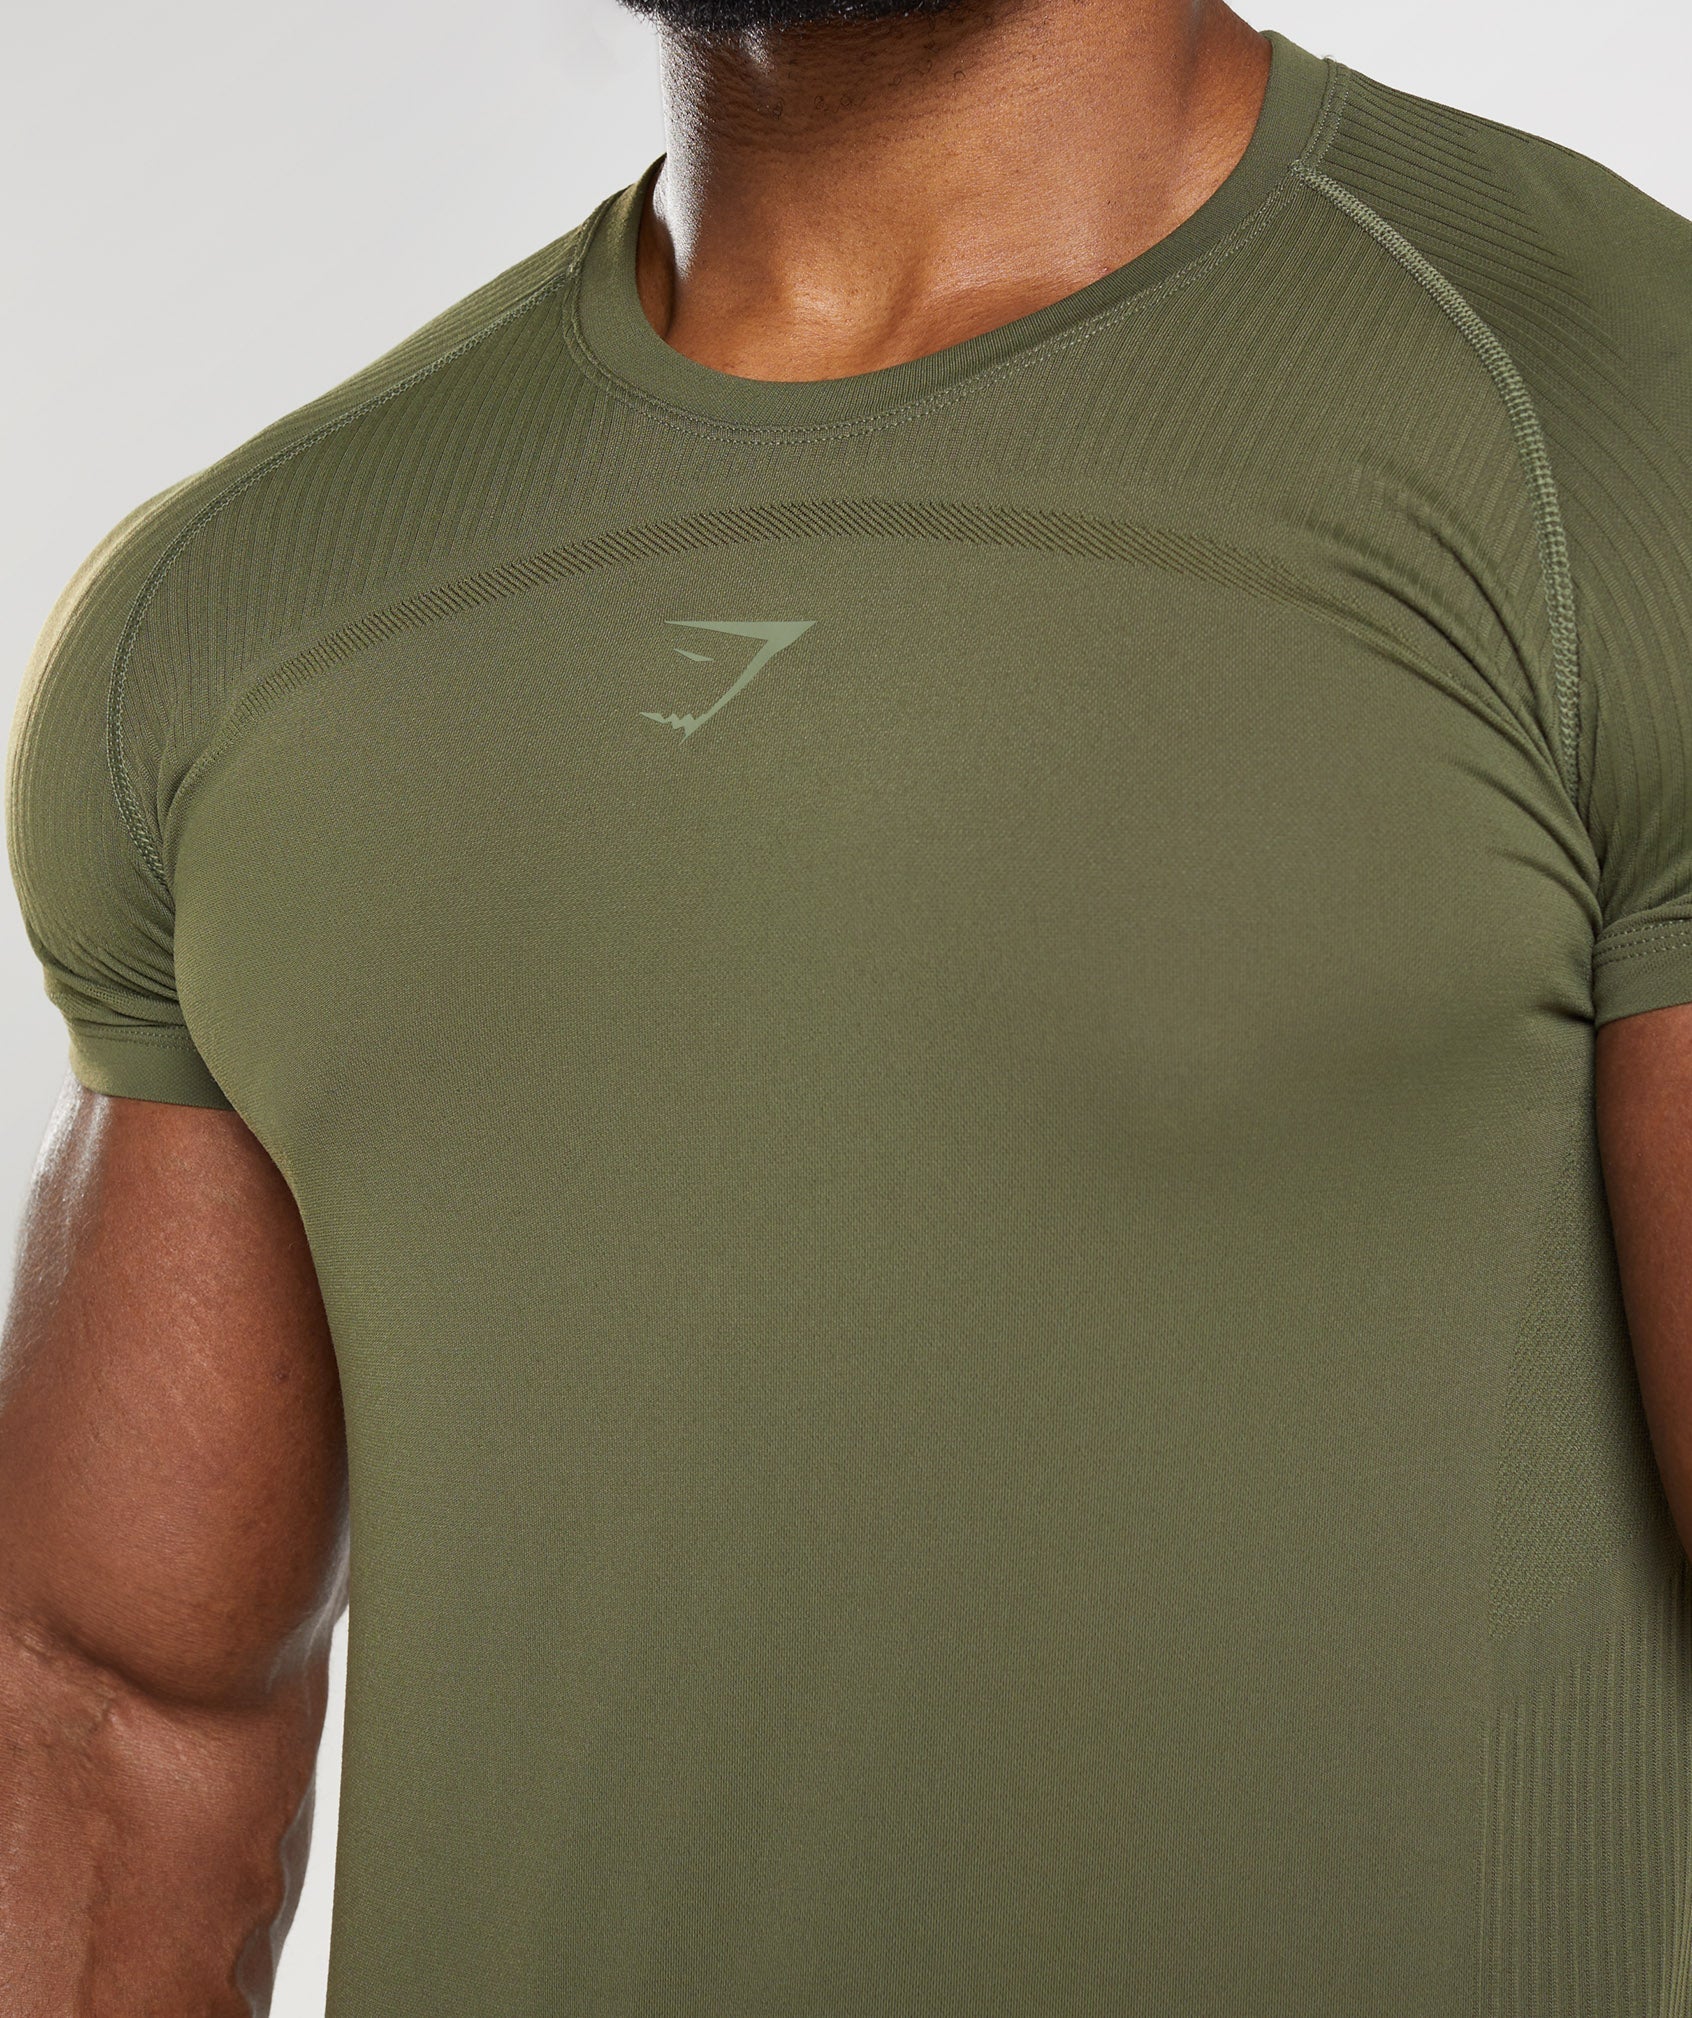 315 Seamless T-Shirt in Core Olive/Marsh Green